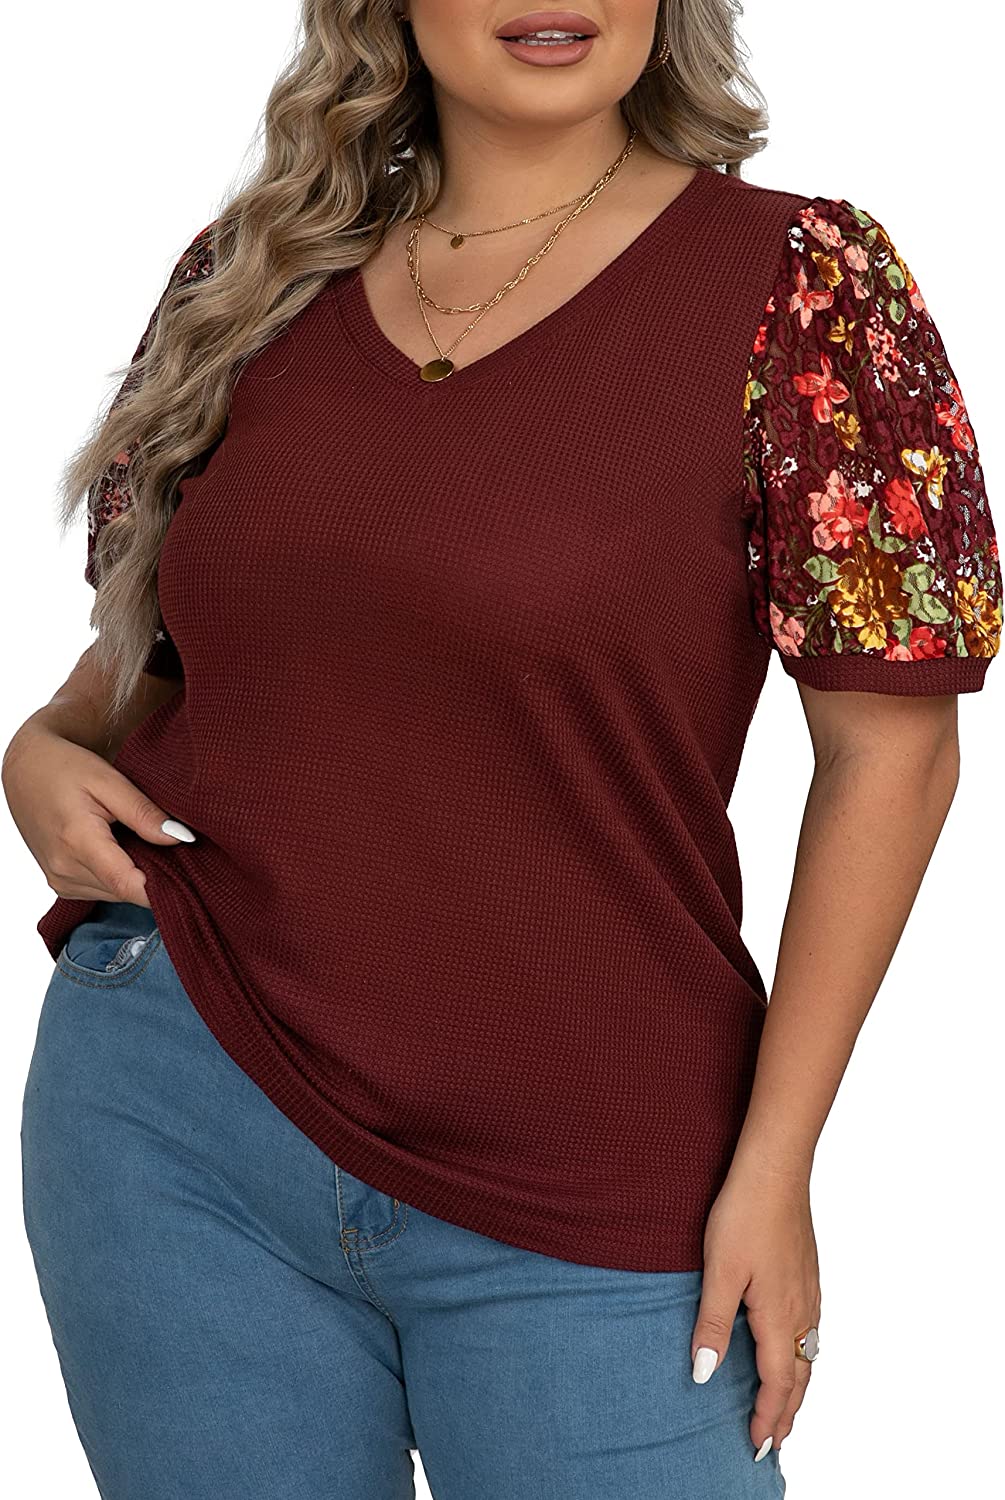 OLRIK Plus Size Tops for Women Summer Casual Womens Short Sleeve Lace Shirts  and Blouses Dark Green-2X Plus - ShopStyle